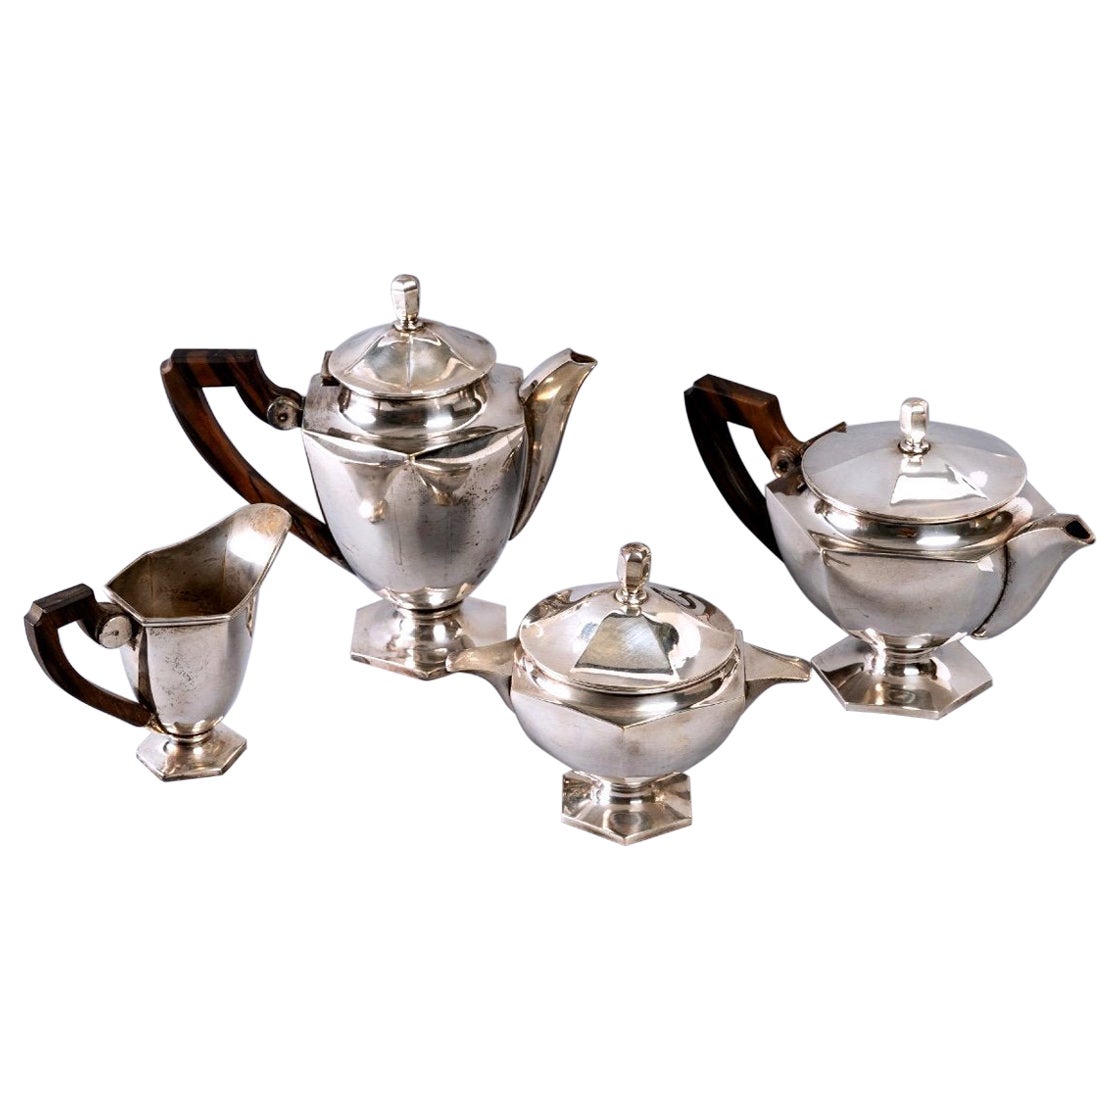 Lovely Tea and Coffee Service of Four Pieces - Silver Metal - Period: Art Deco For Sale